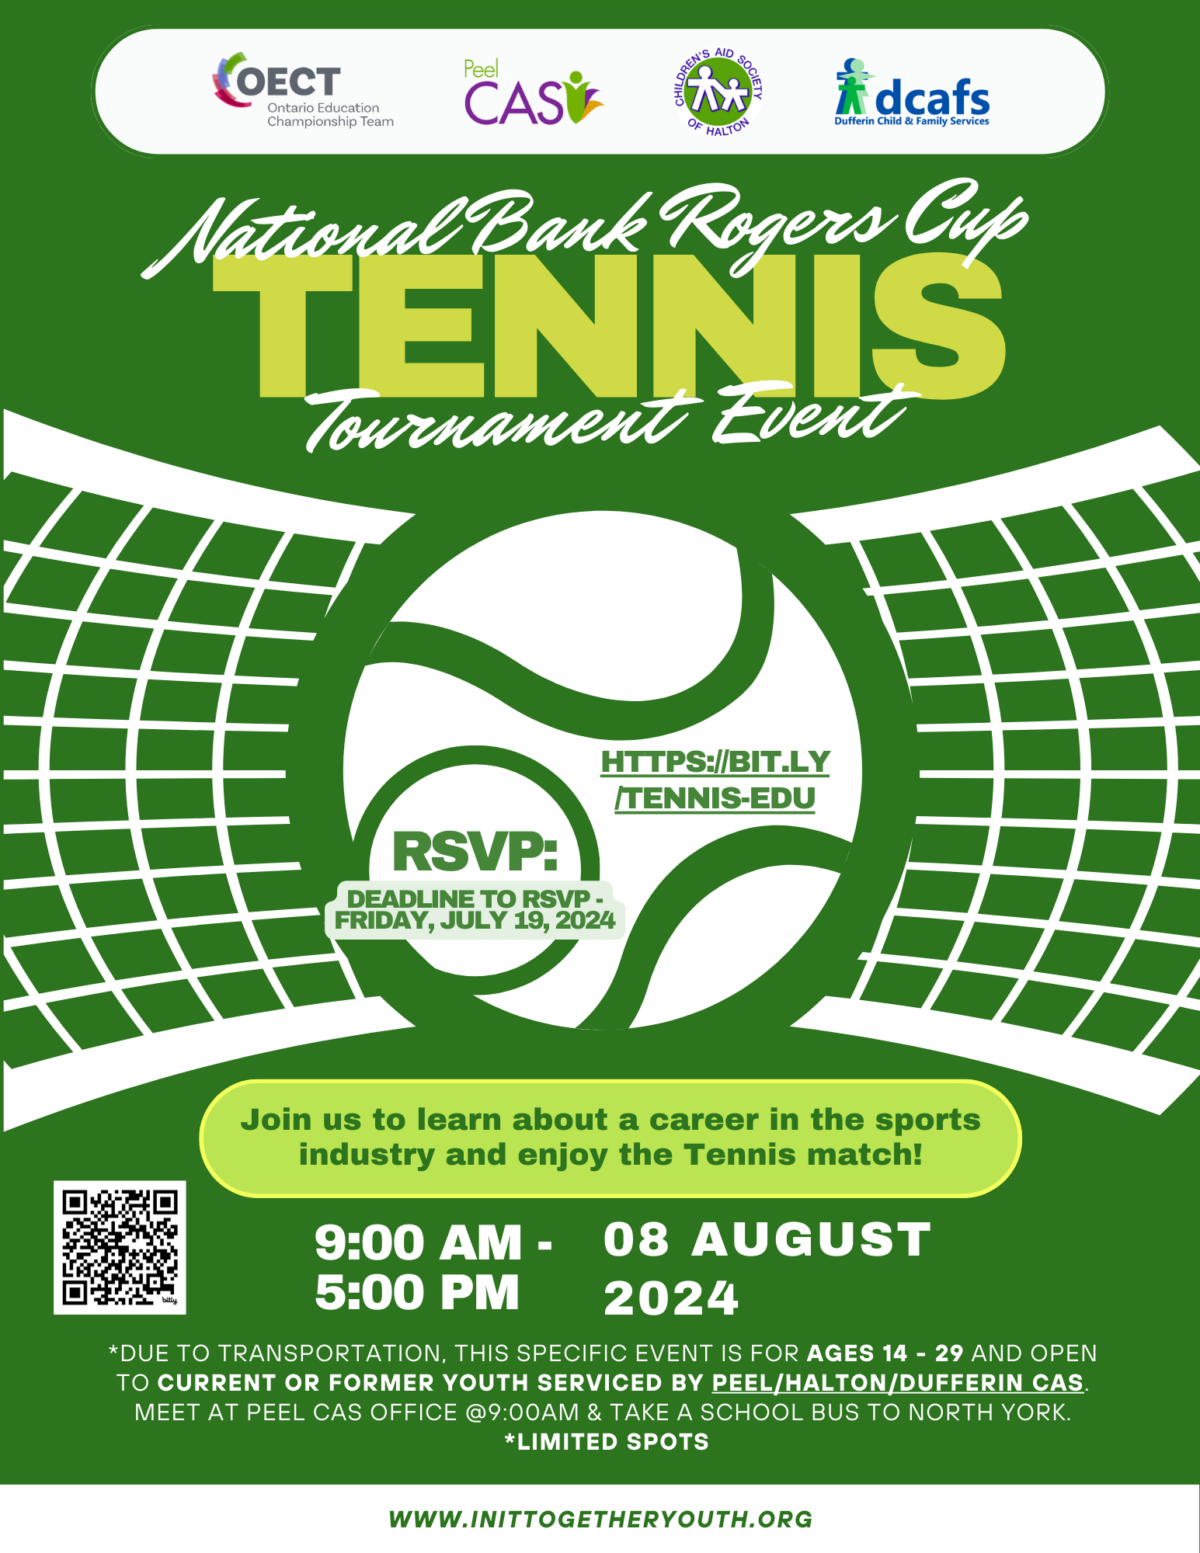 Join OECT for the National Bank Open, Roger’s Cup Tennis Tournament!